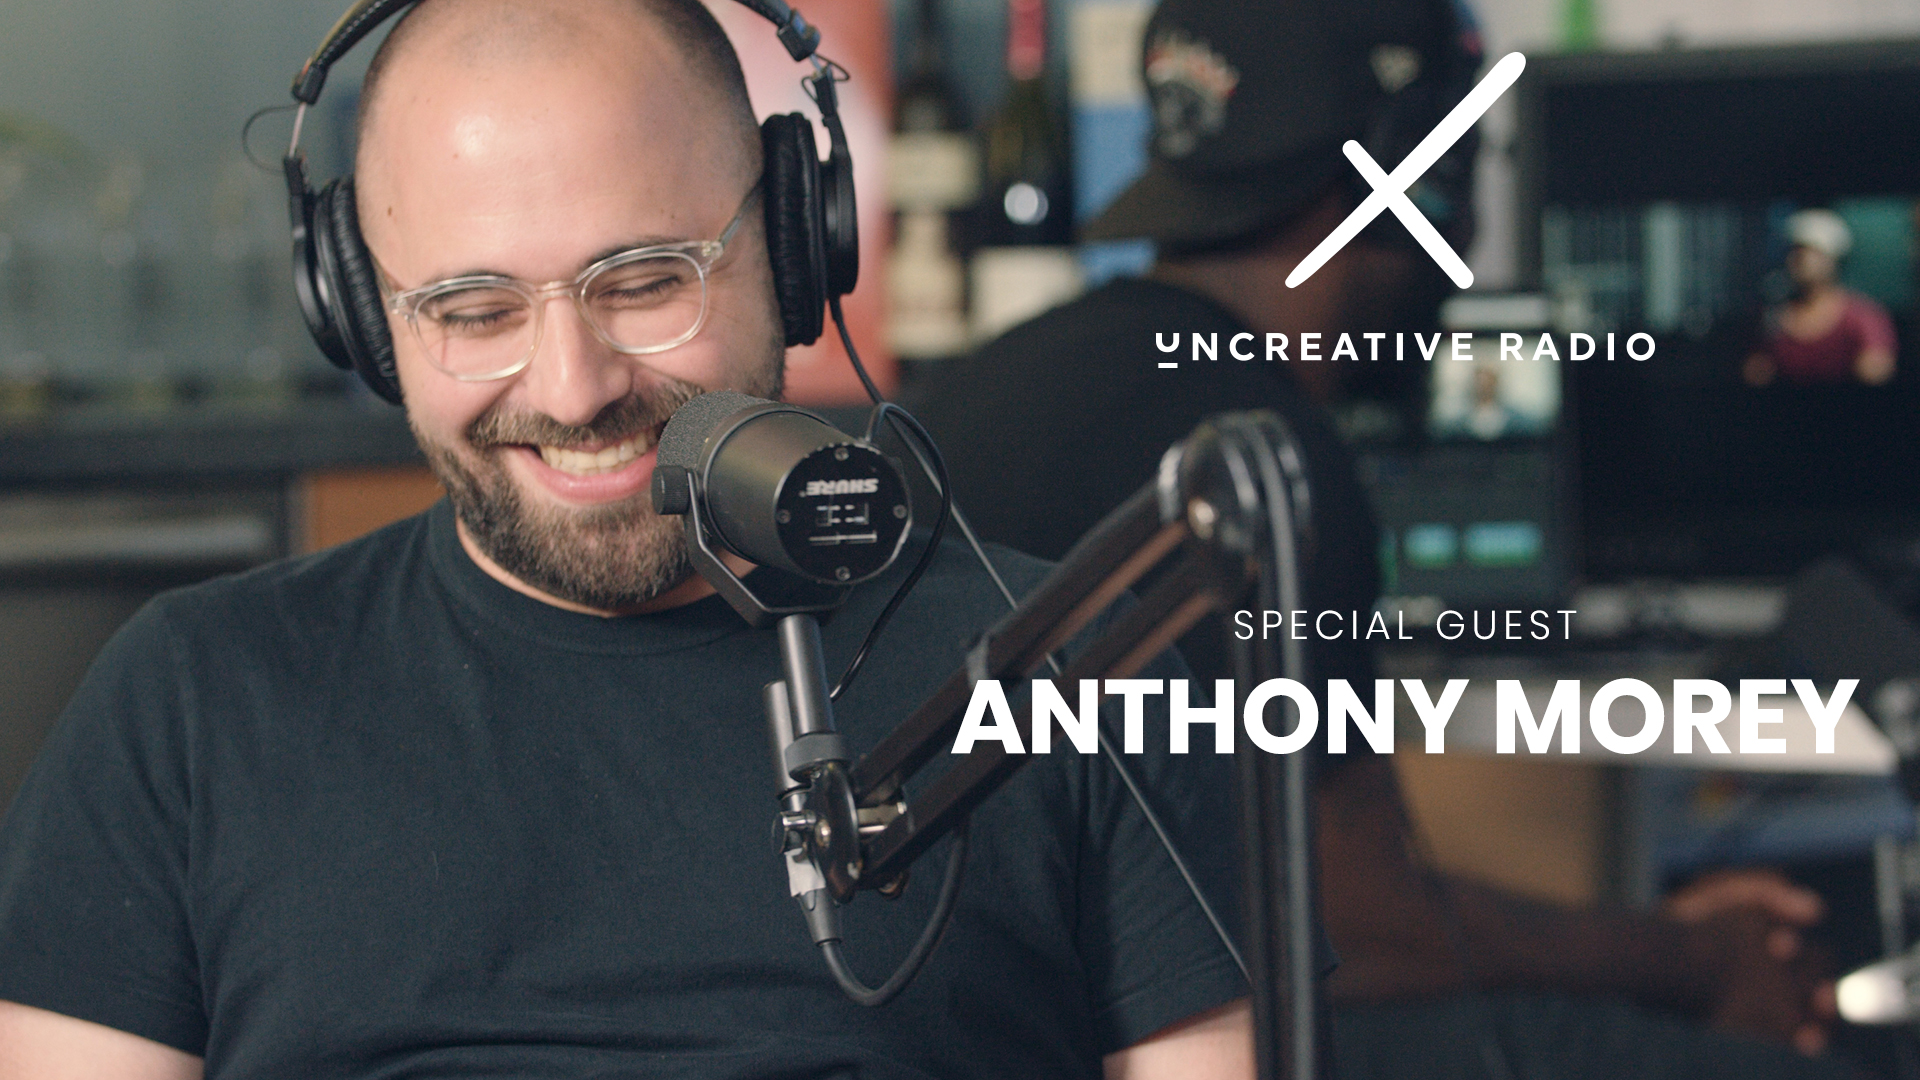 Uncreative Radio with Anthony Morey wearing headphones and smiling.